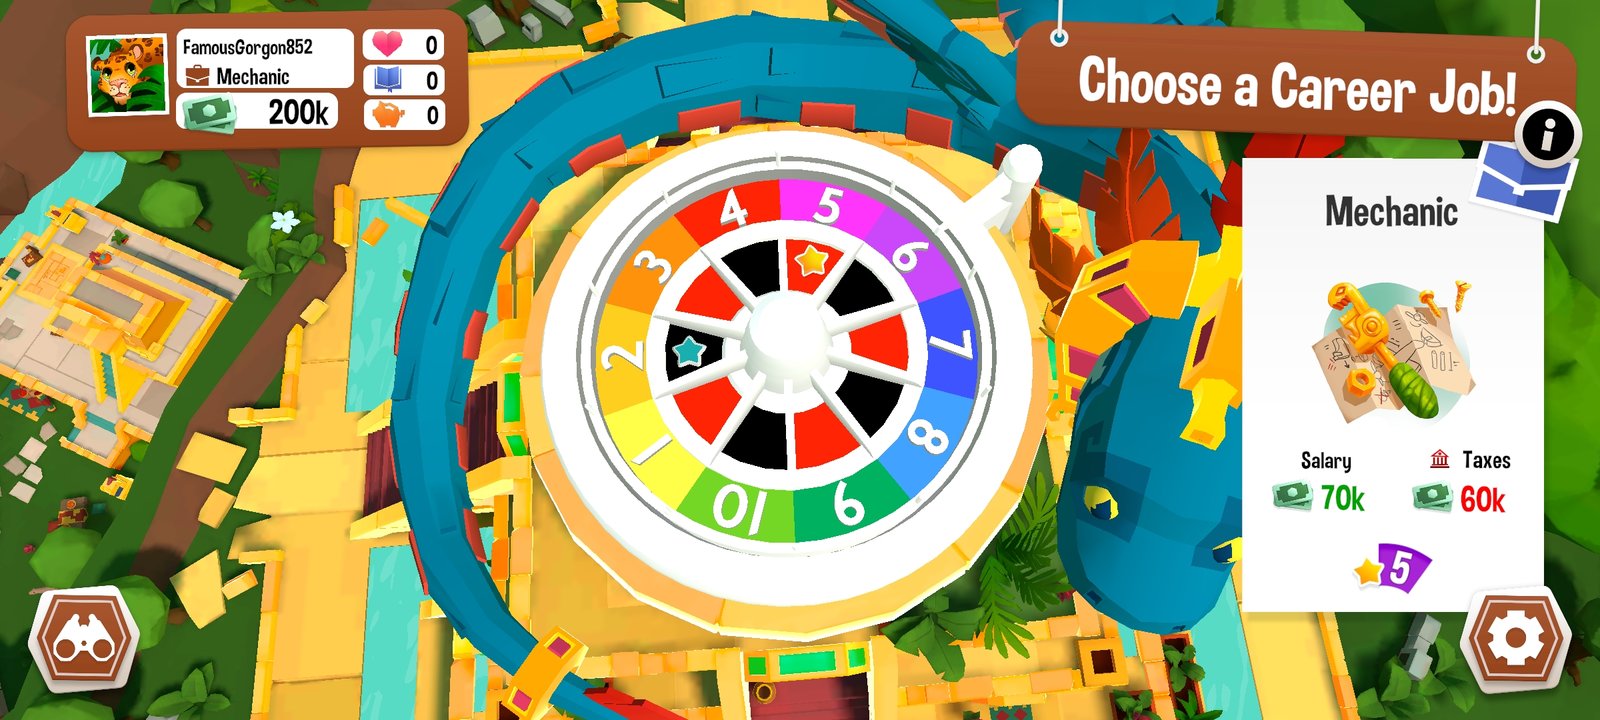 The Game of Life 2 Ver. 0.4.6 MOD APK  Unlocked -  - Android  & iOS MODs, Mobile Games & Apps